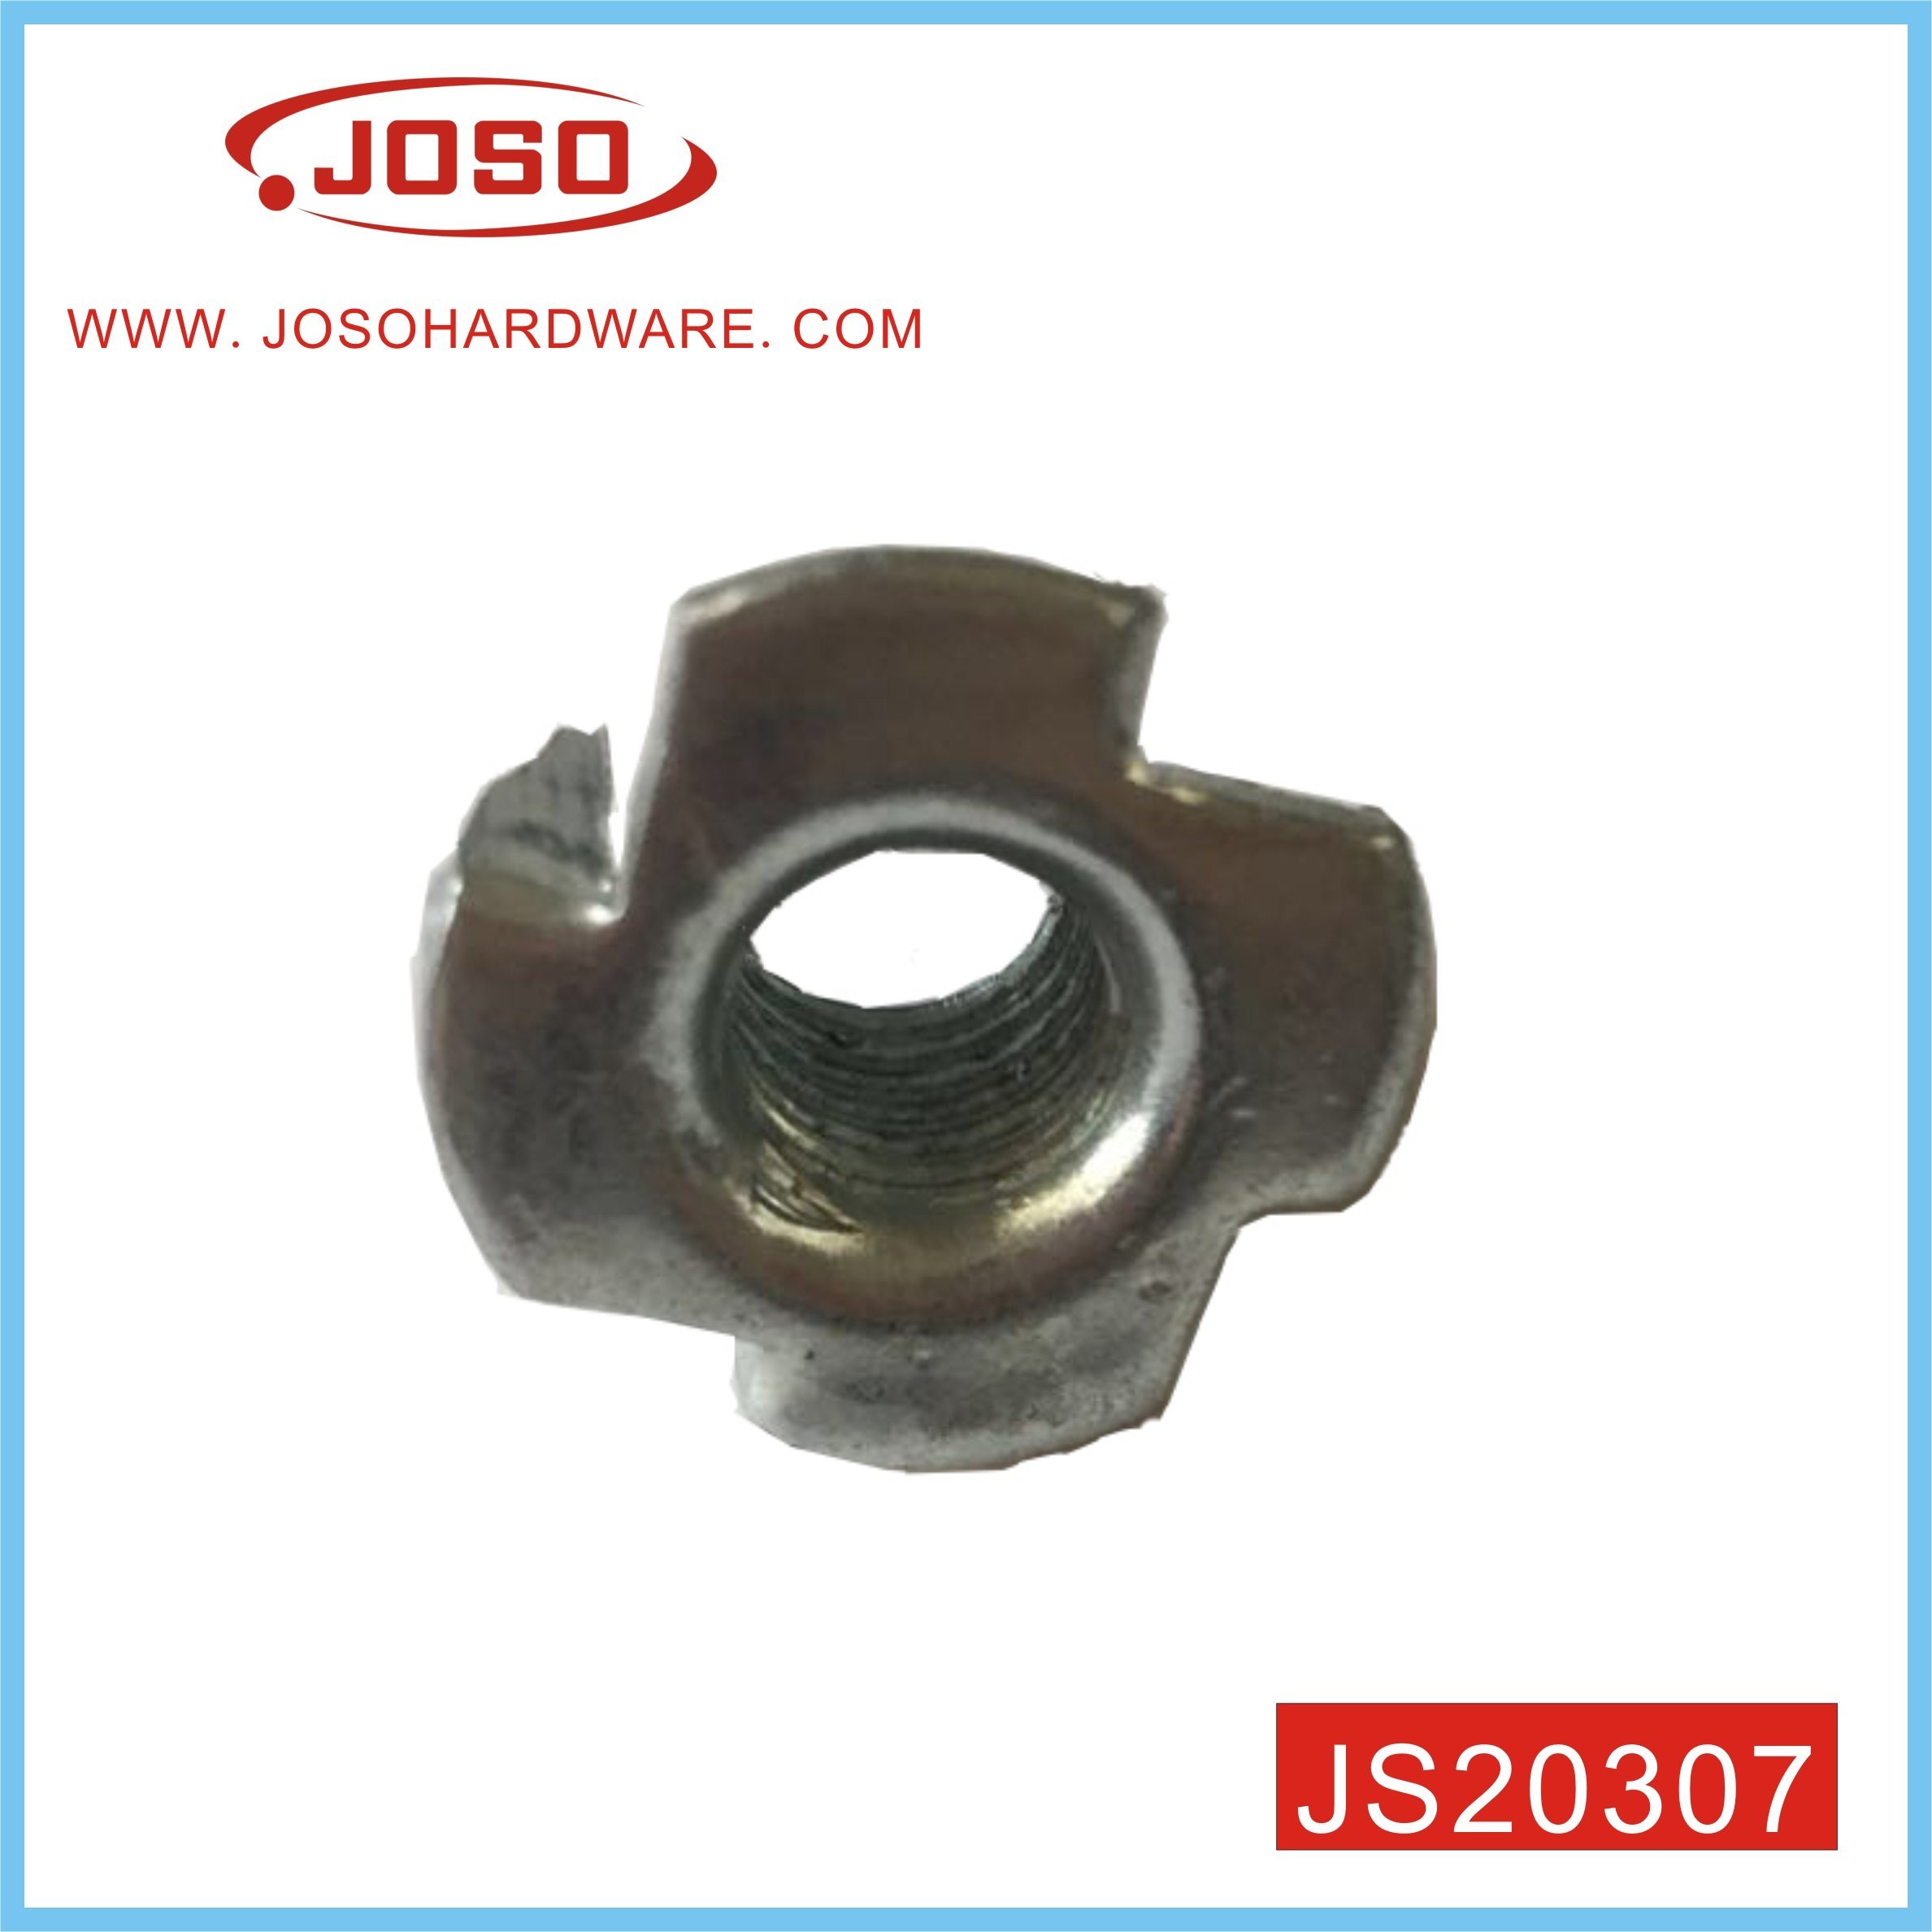 Zinc Plated Steel Tee Nut with Four Prongs for Furniture